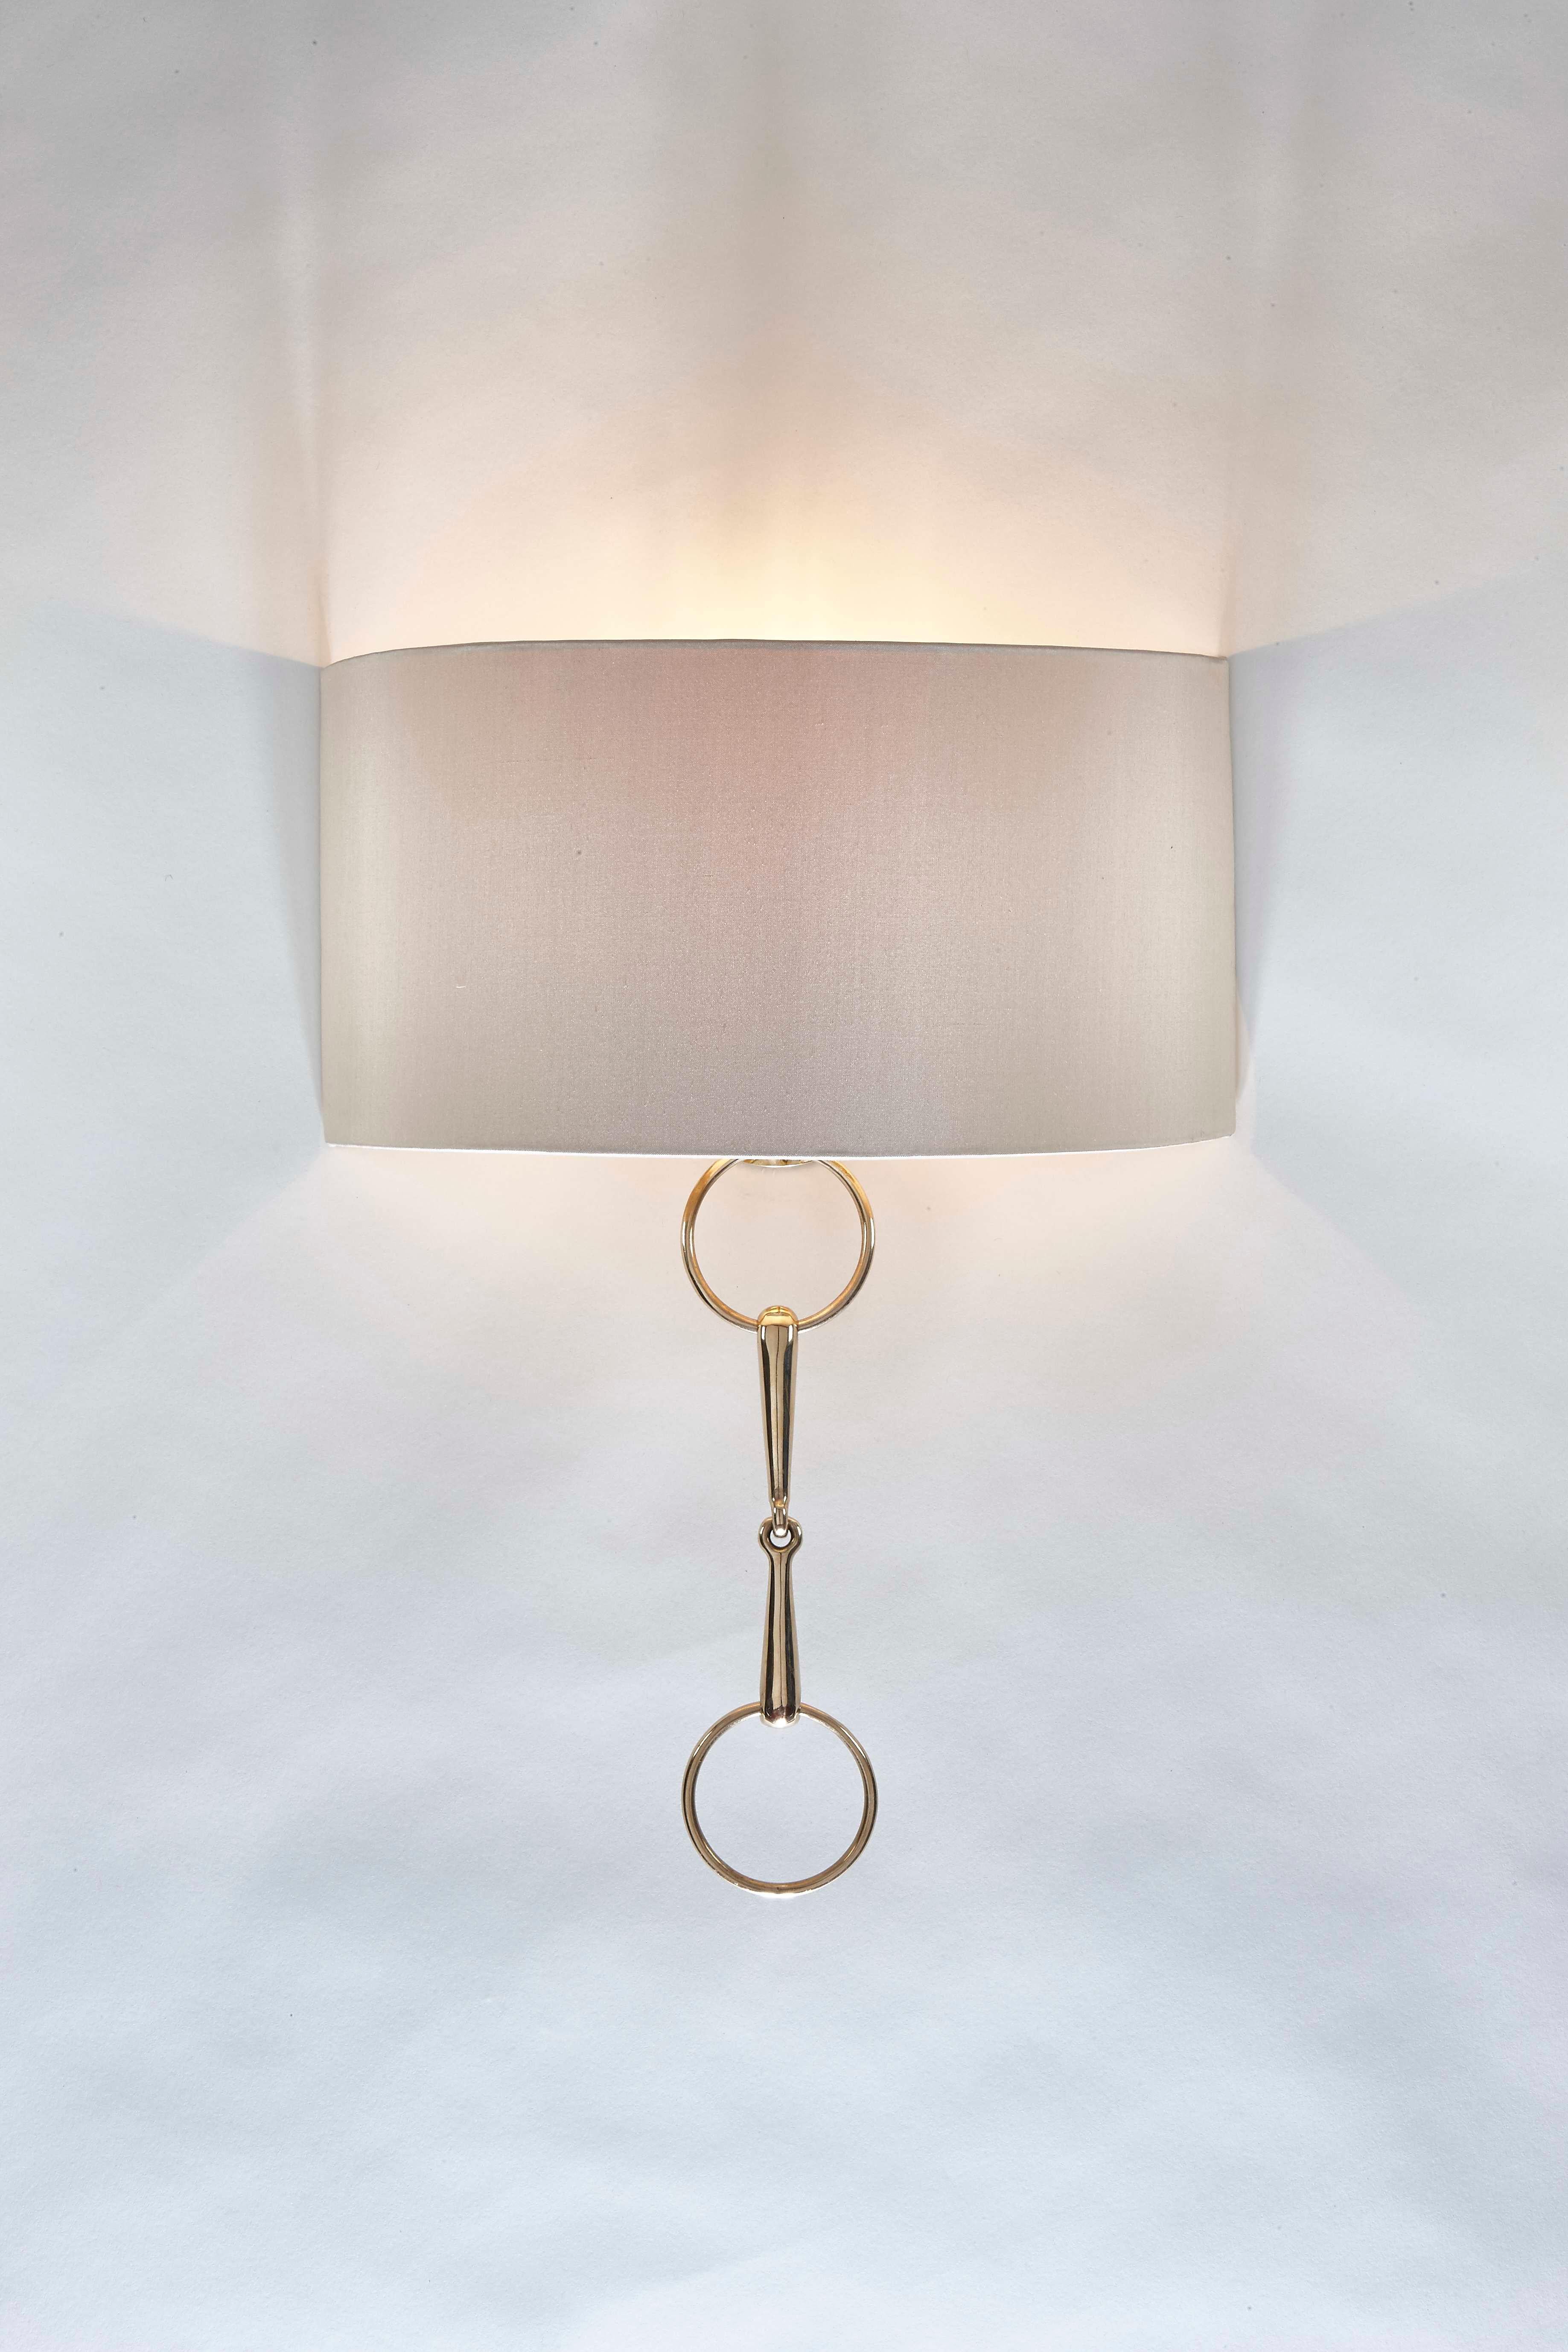 Named ‘Ronnie’ after a horse very dear to Cocovara’s founder. These handmade wall lights have a soft bespoke half-shade with a gorgeous polished brass snaffle as its centrepiece. Available in both long and short versions perfect for any country home